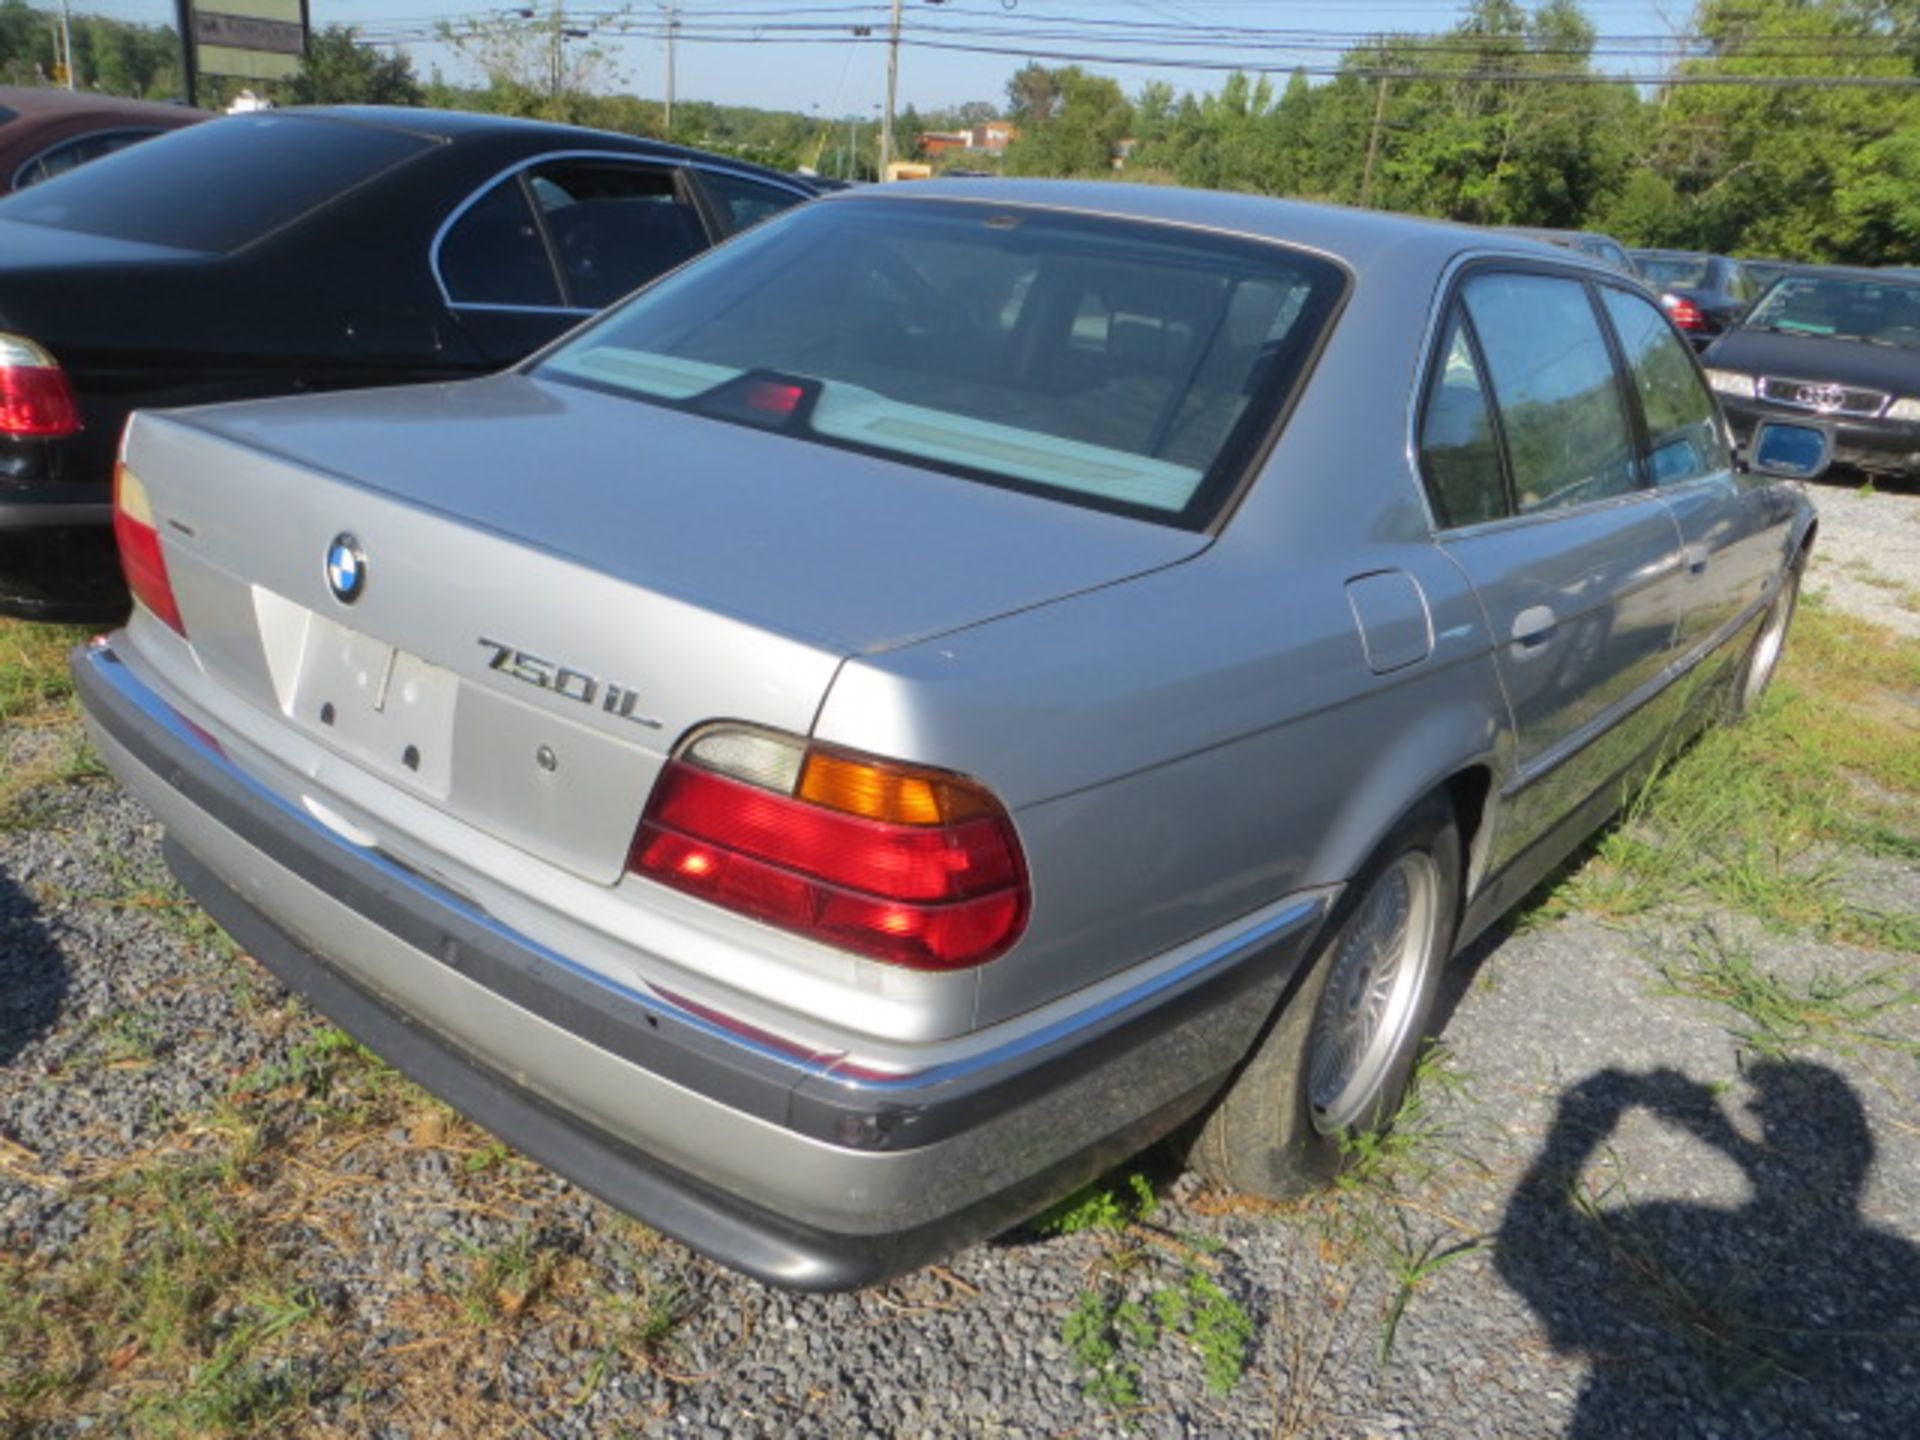 1998 BMW 750iL-NEEDS WORK-CRACKED SIDE GLASS 126000 MILES,VIN WBAGK232XWDH69608, SOLD WITH GOOD TRAN - Image 4 of 4